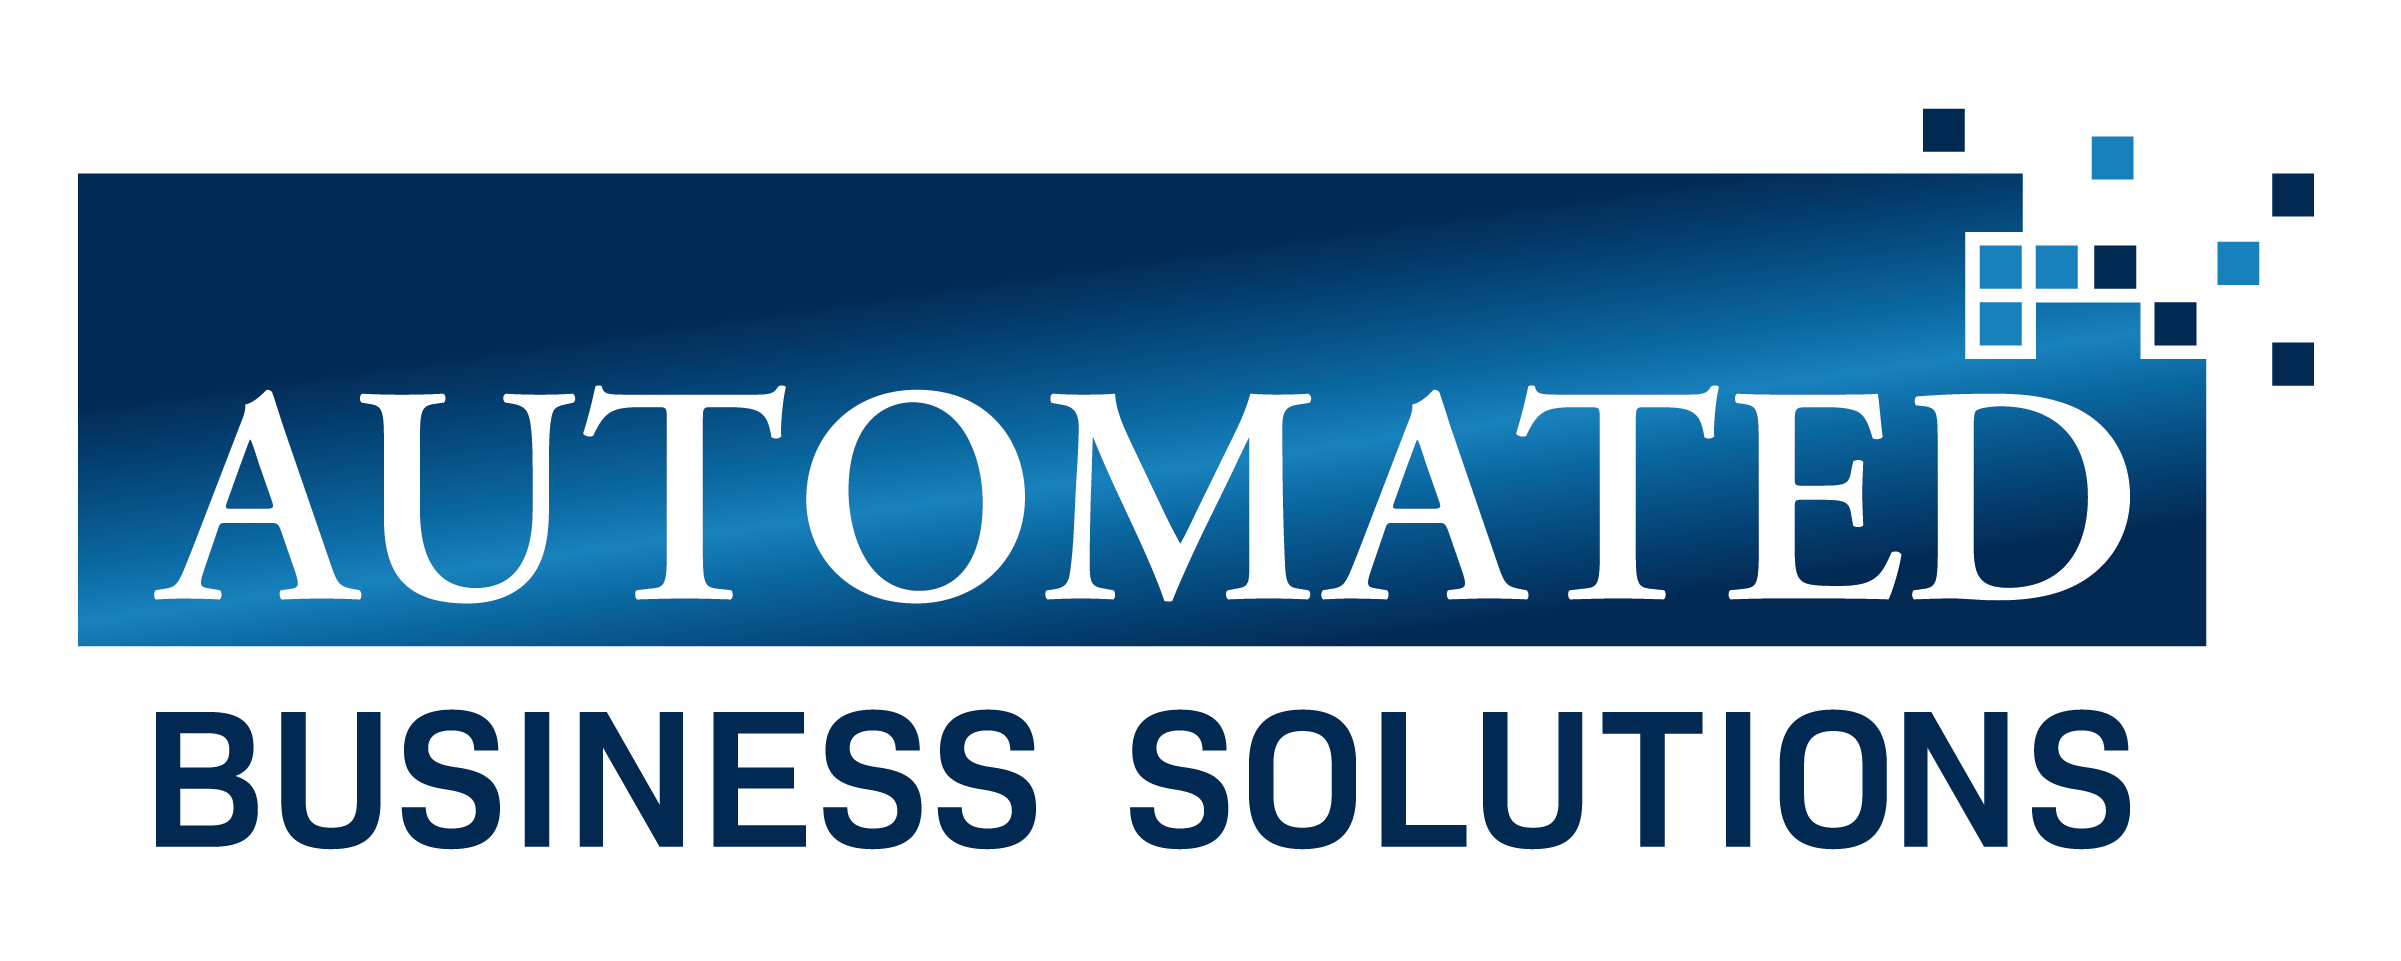 Automated Business Solutions